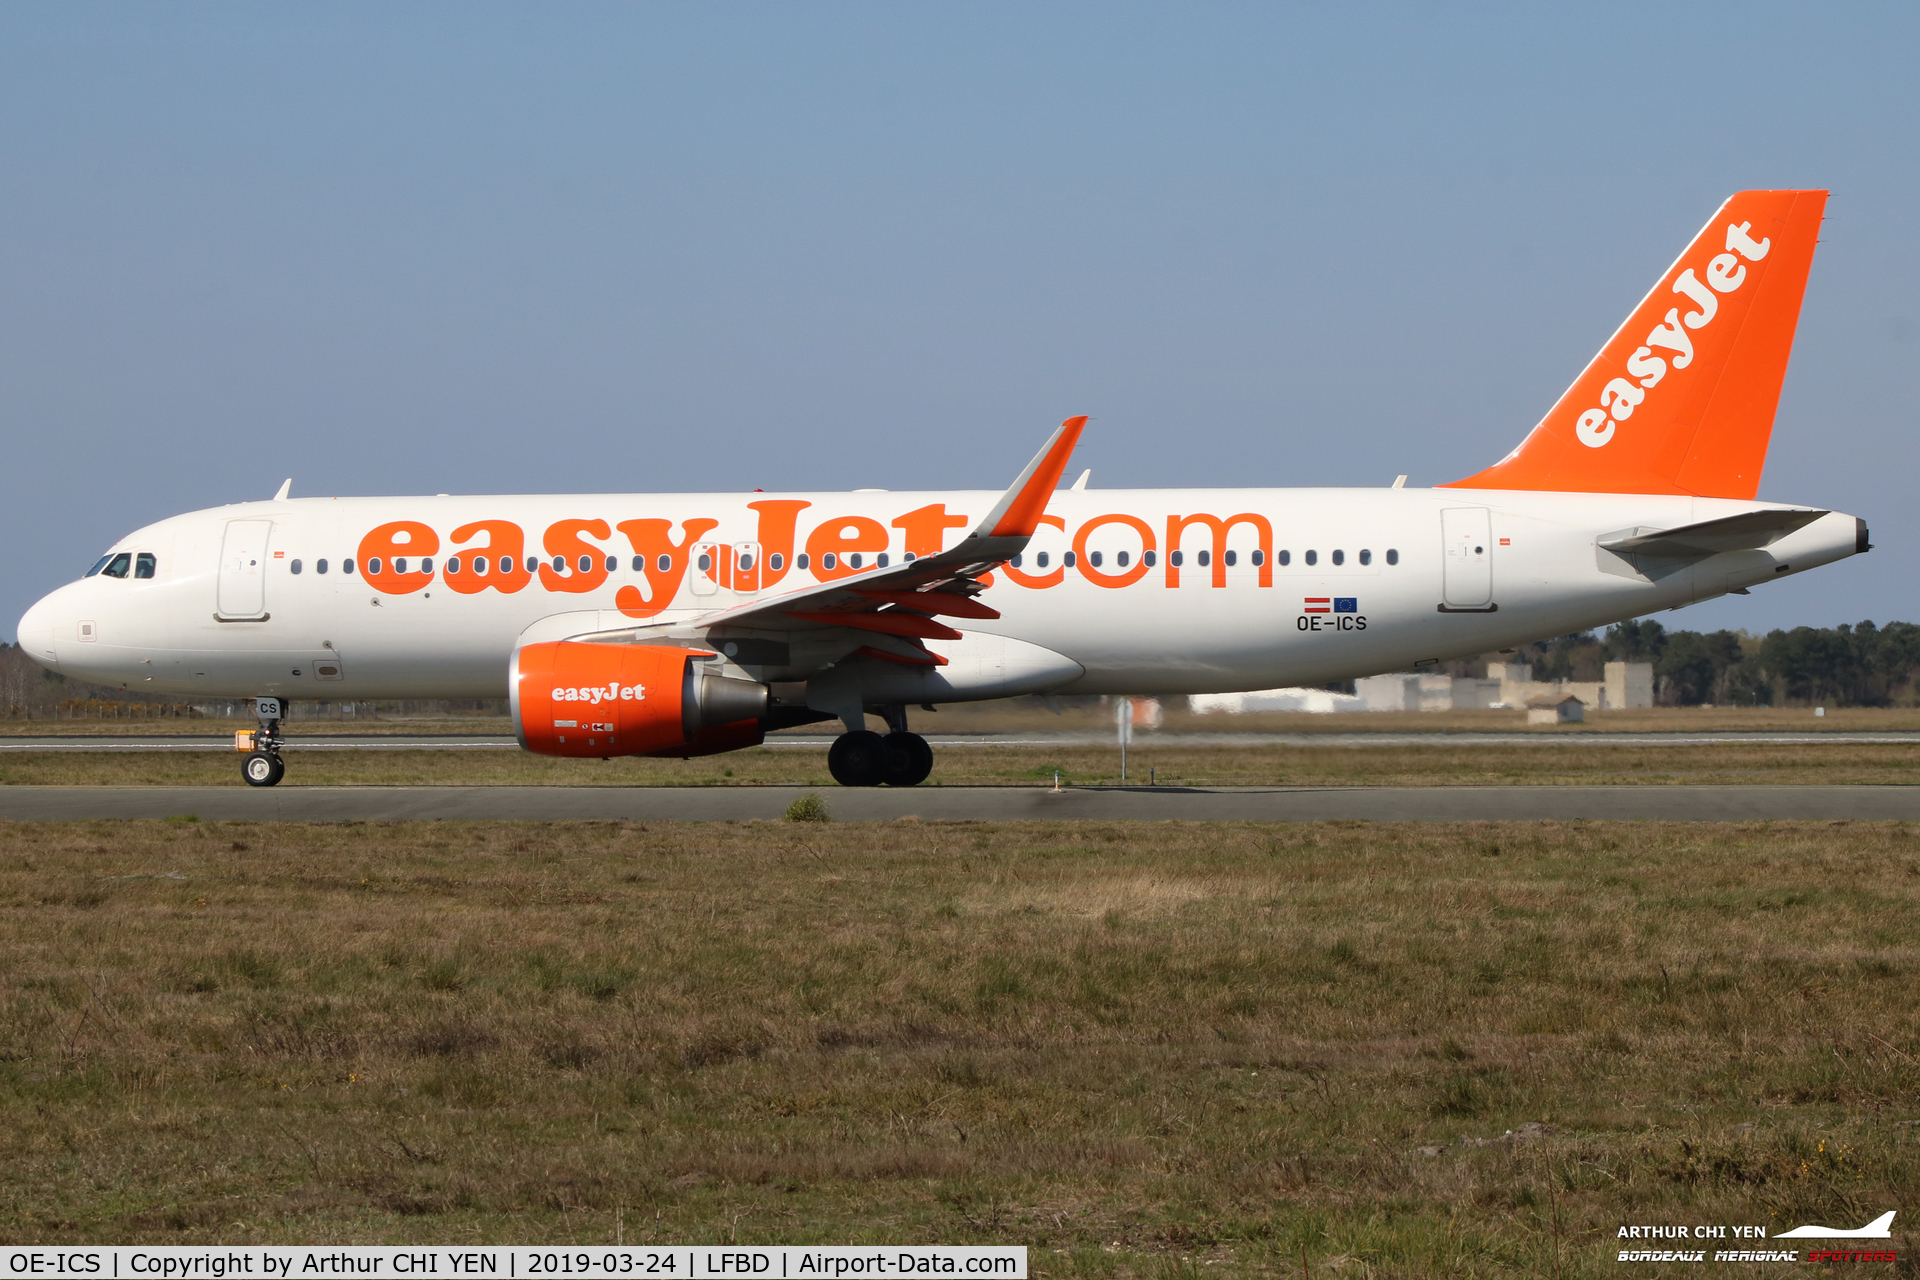 OE-ICS, 2014 Airbus A320-214 C/N 5981, EasyJet Airbus A320 flight U24483 to Luxembourg.